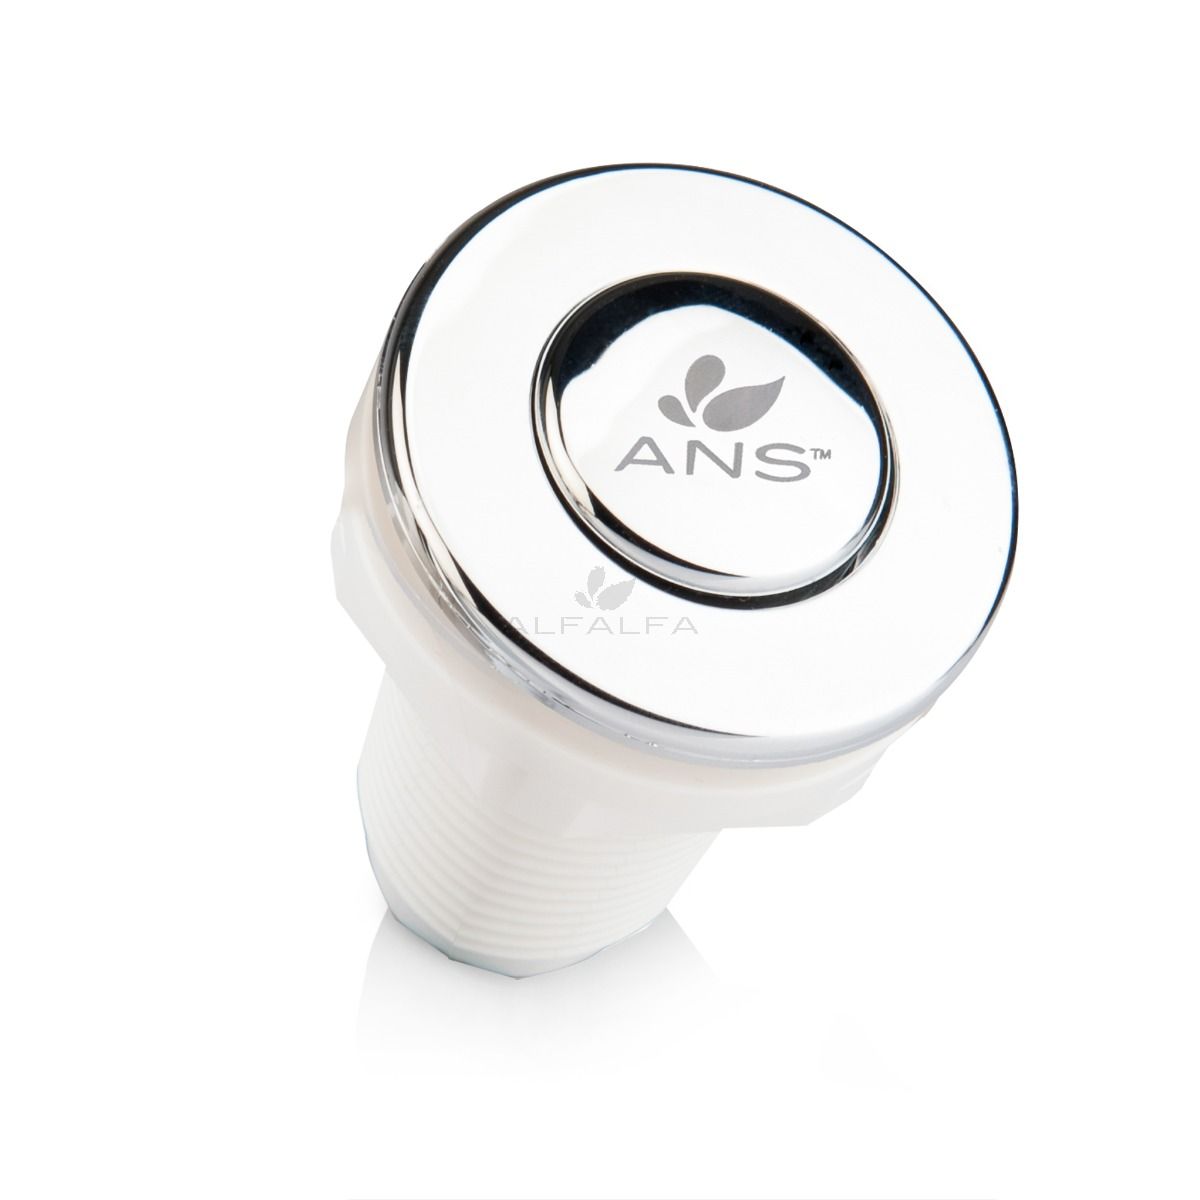 Spa Push Button with ANS logo